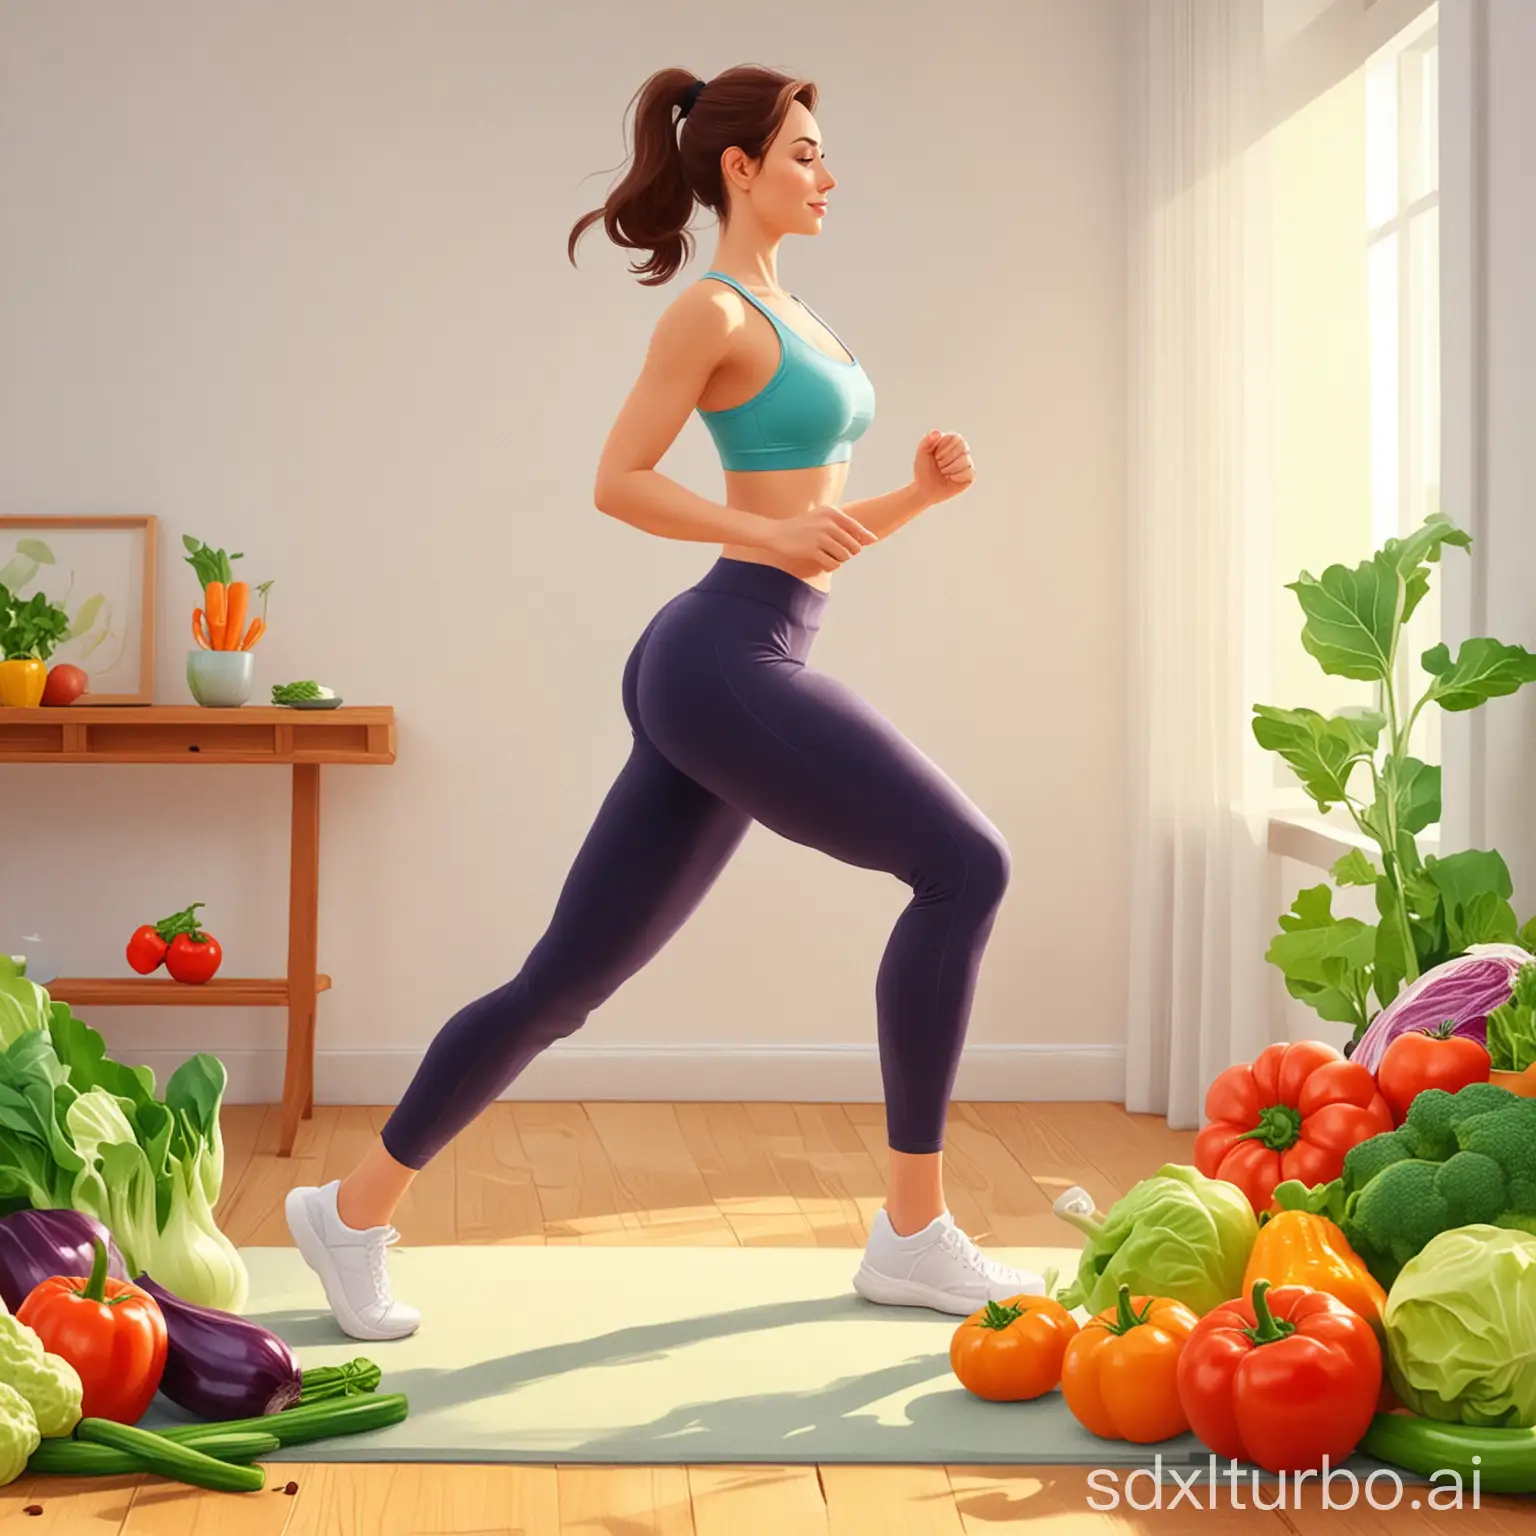 cartoon illustration of a woman doing exercises, and vegetables in background details, illustration abstract